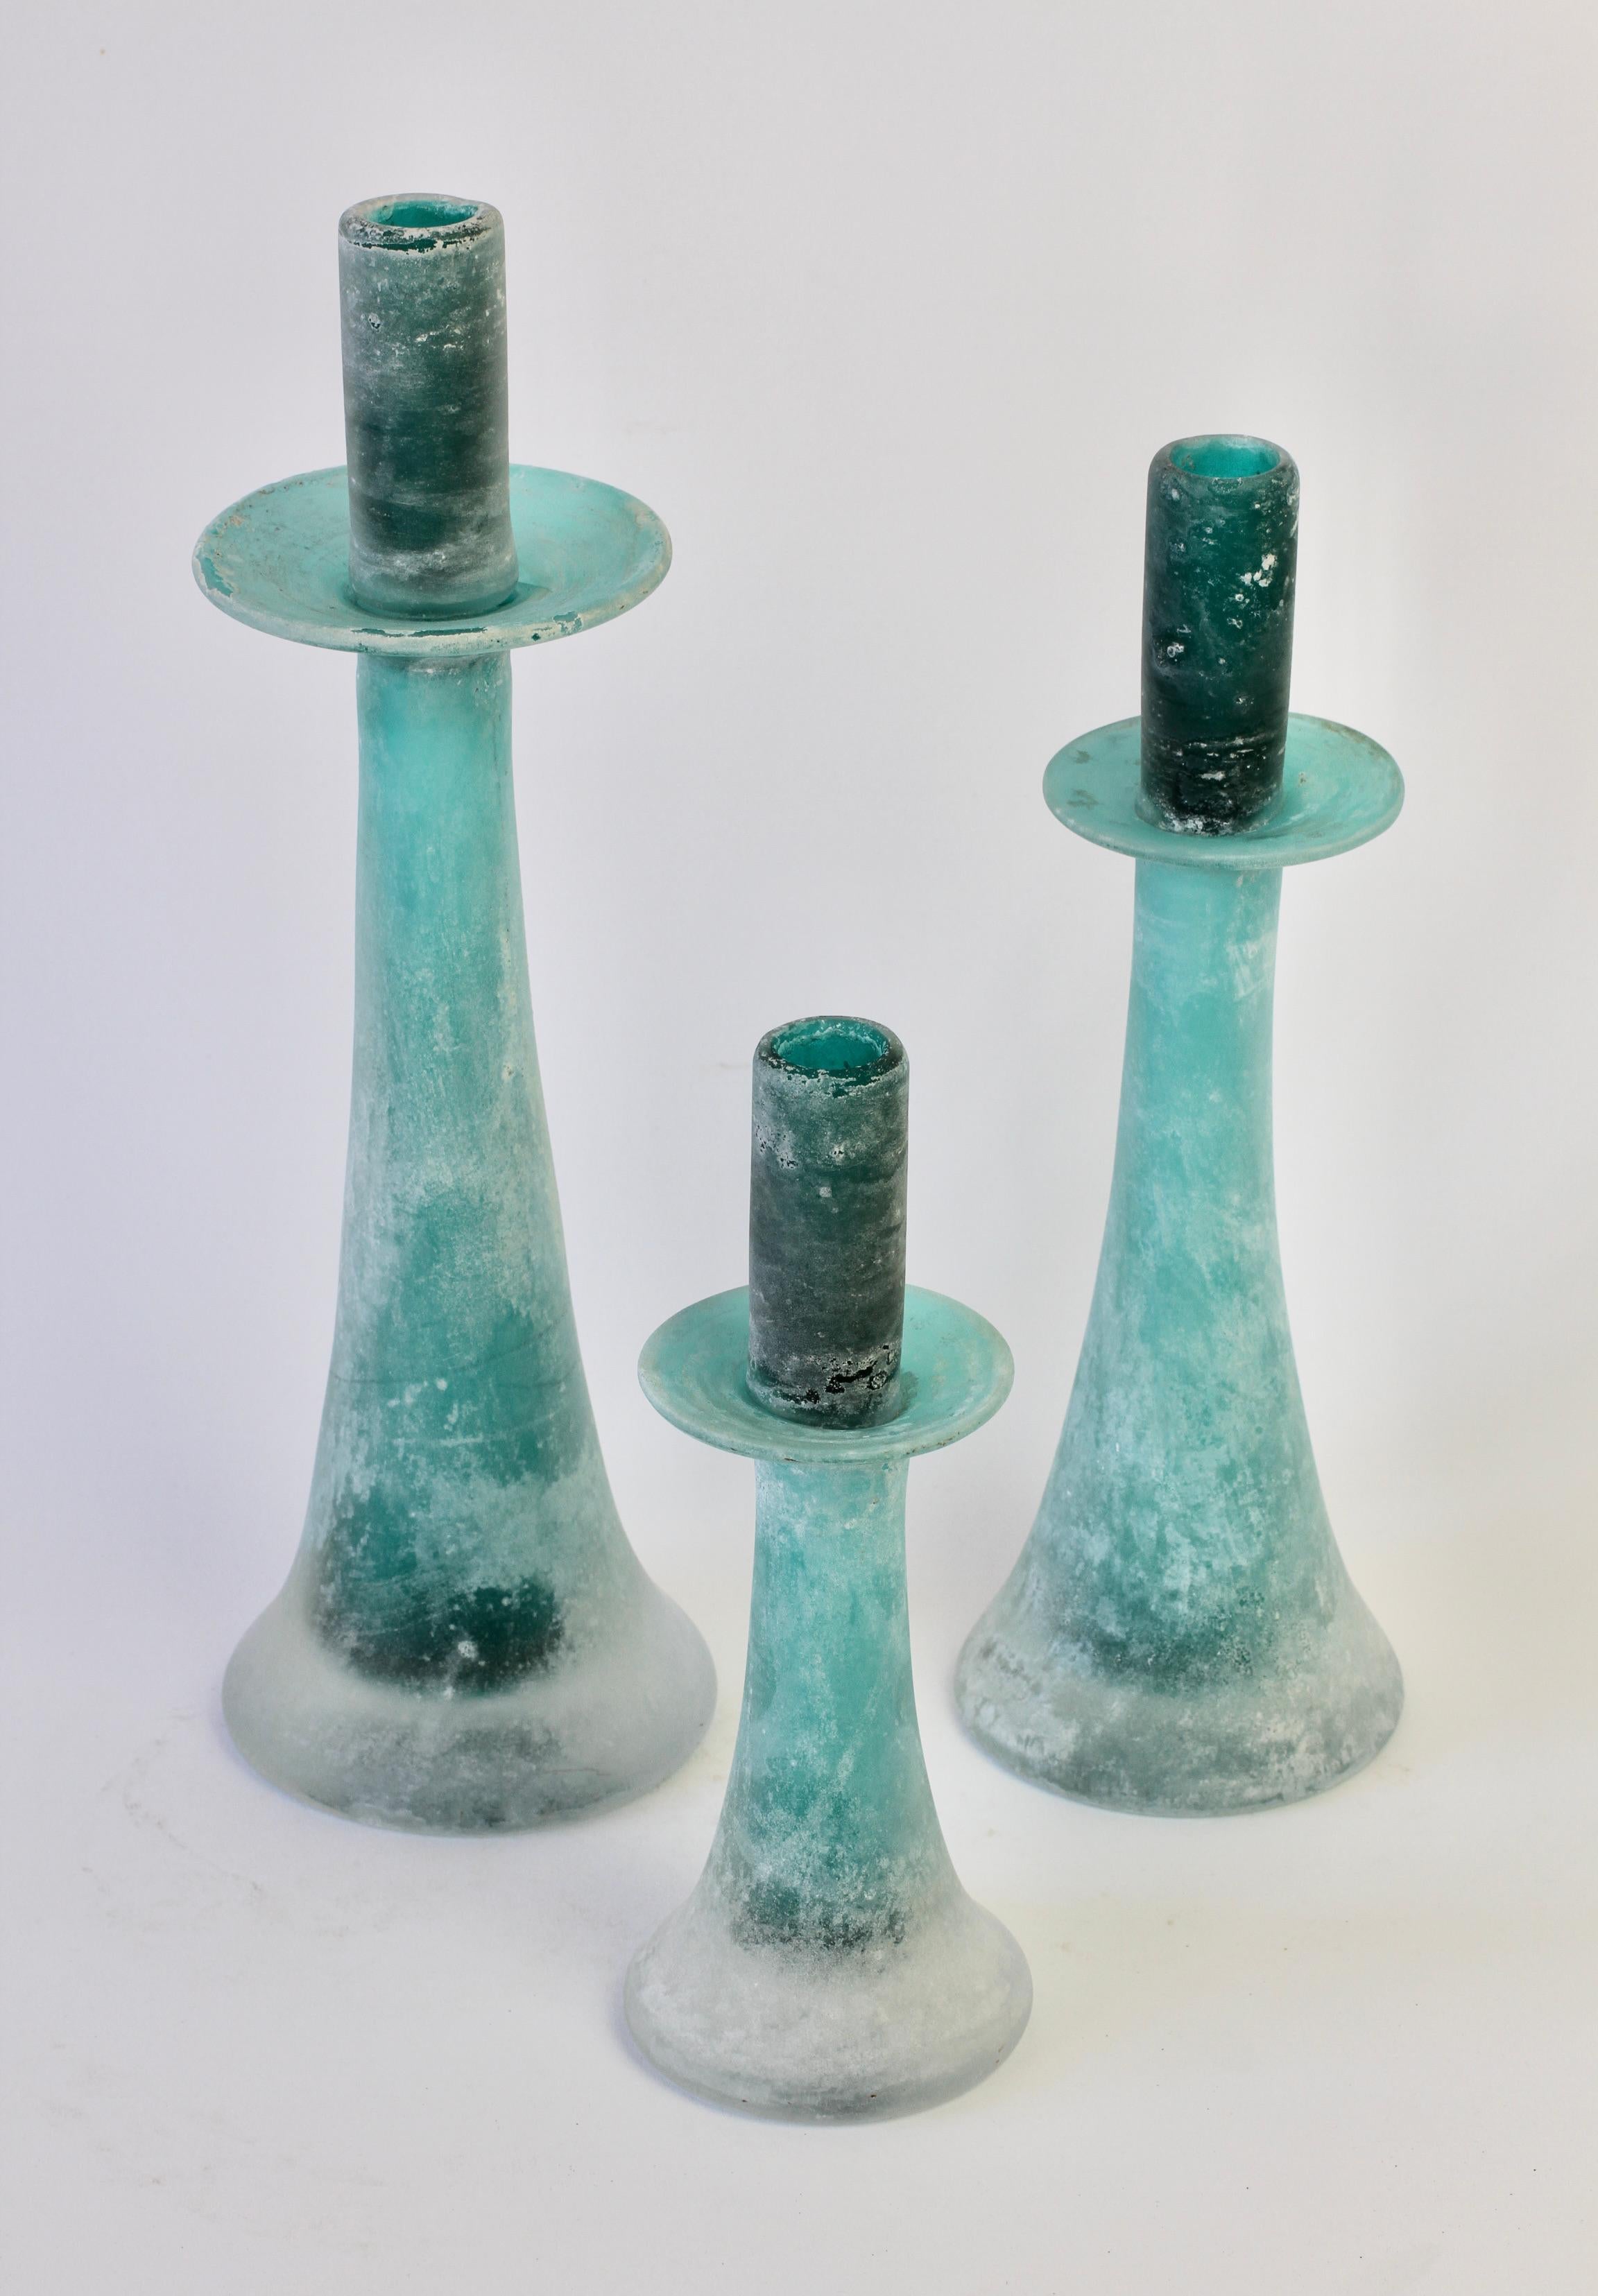 Signed vintage Mid-Century rare set / collection or ensemble of turquoise / green 'scavo' glass candlestick holders attributed to Antonio da Ros for Cenedese Vetri Murano glass. Made of green / turquoise and clear Murano art glass featuring both the